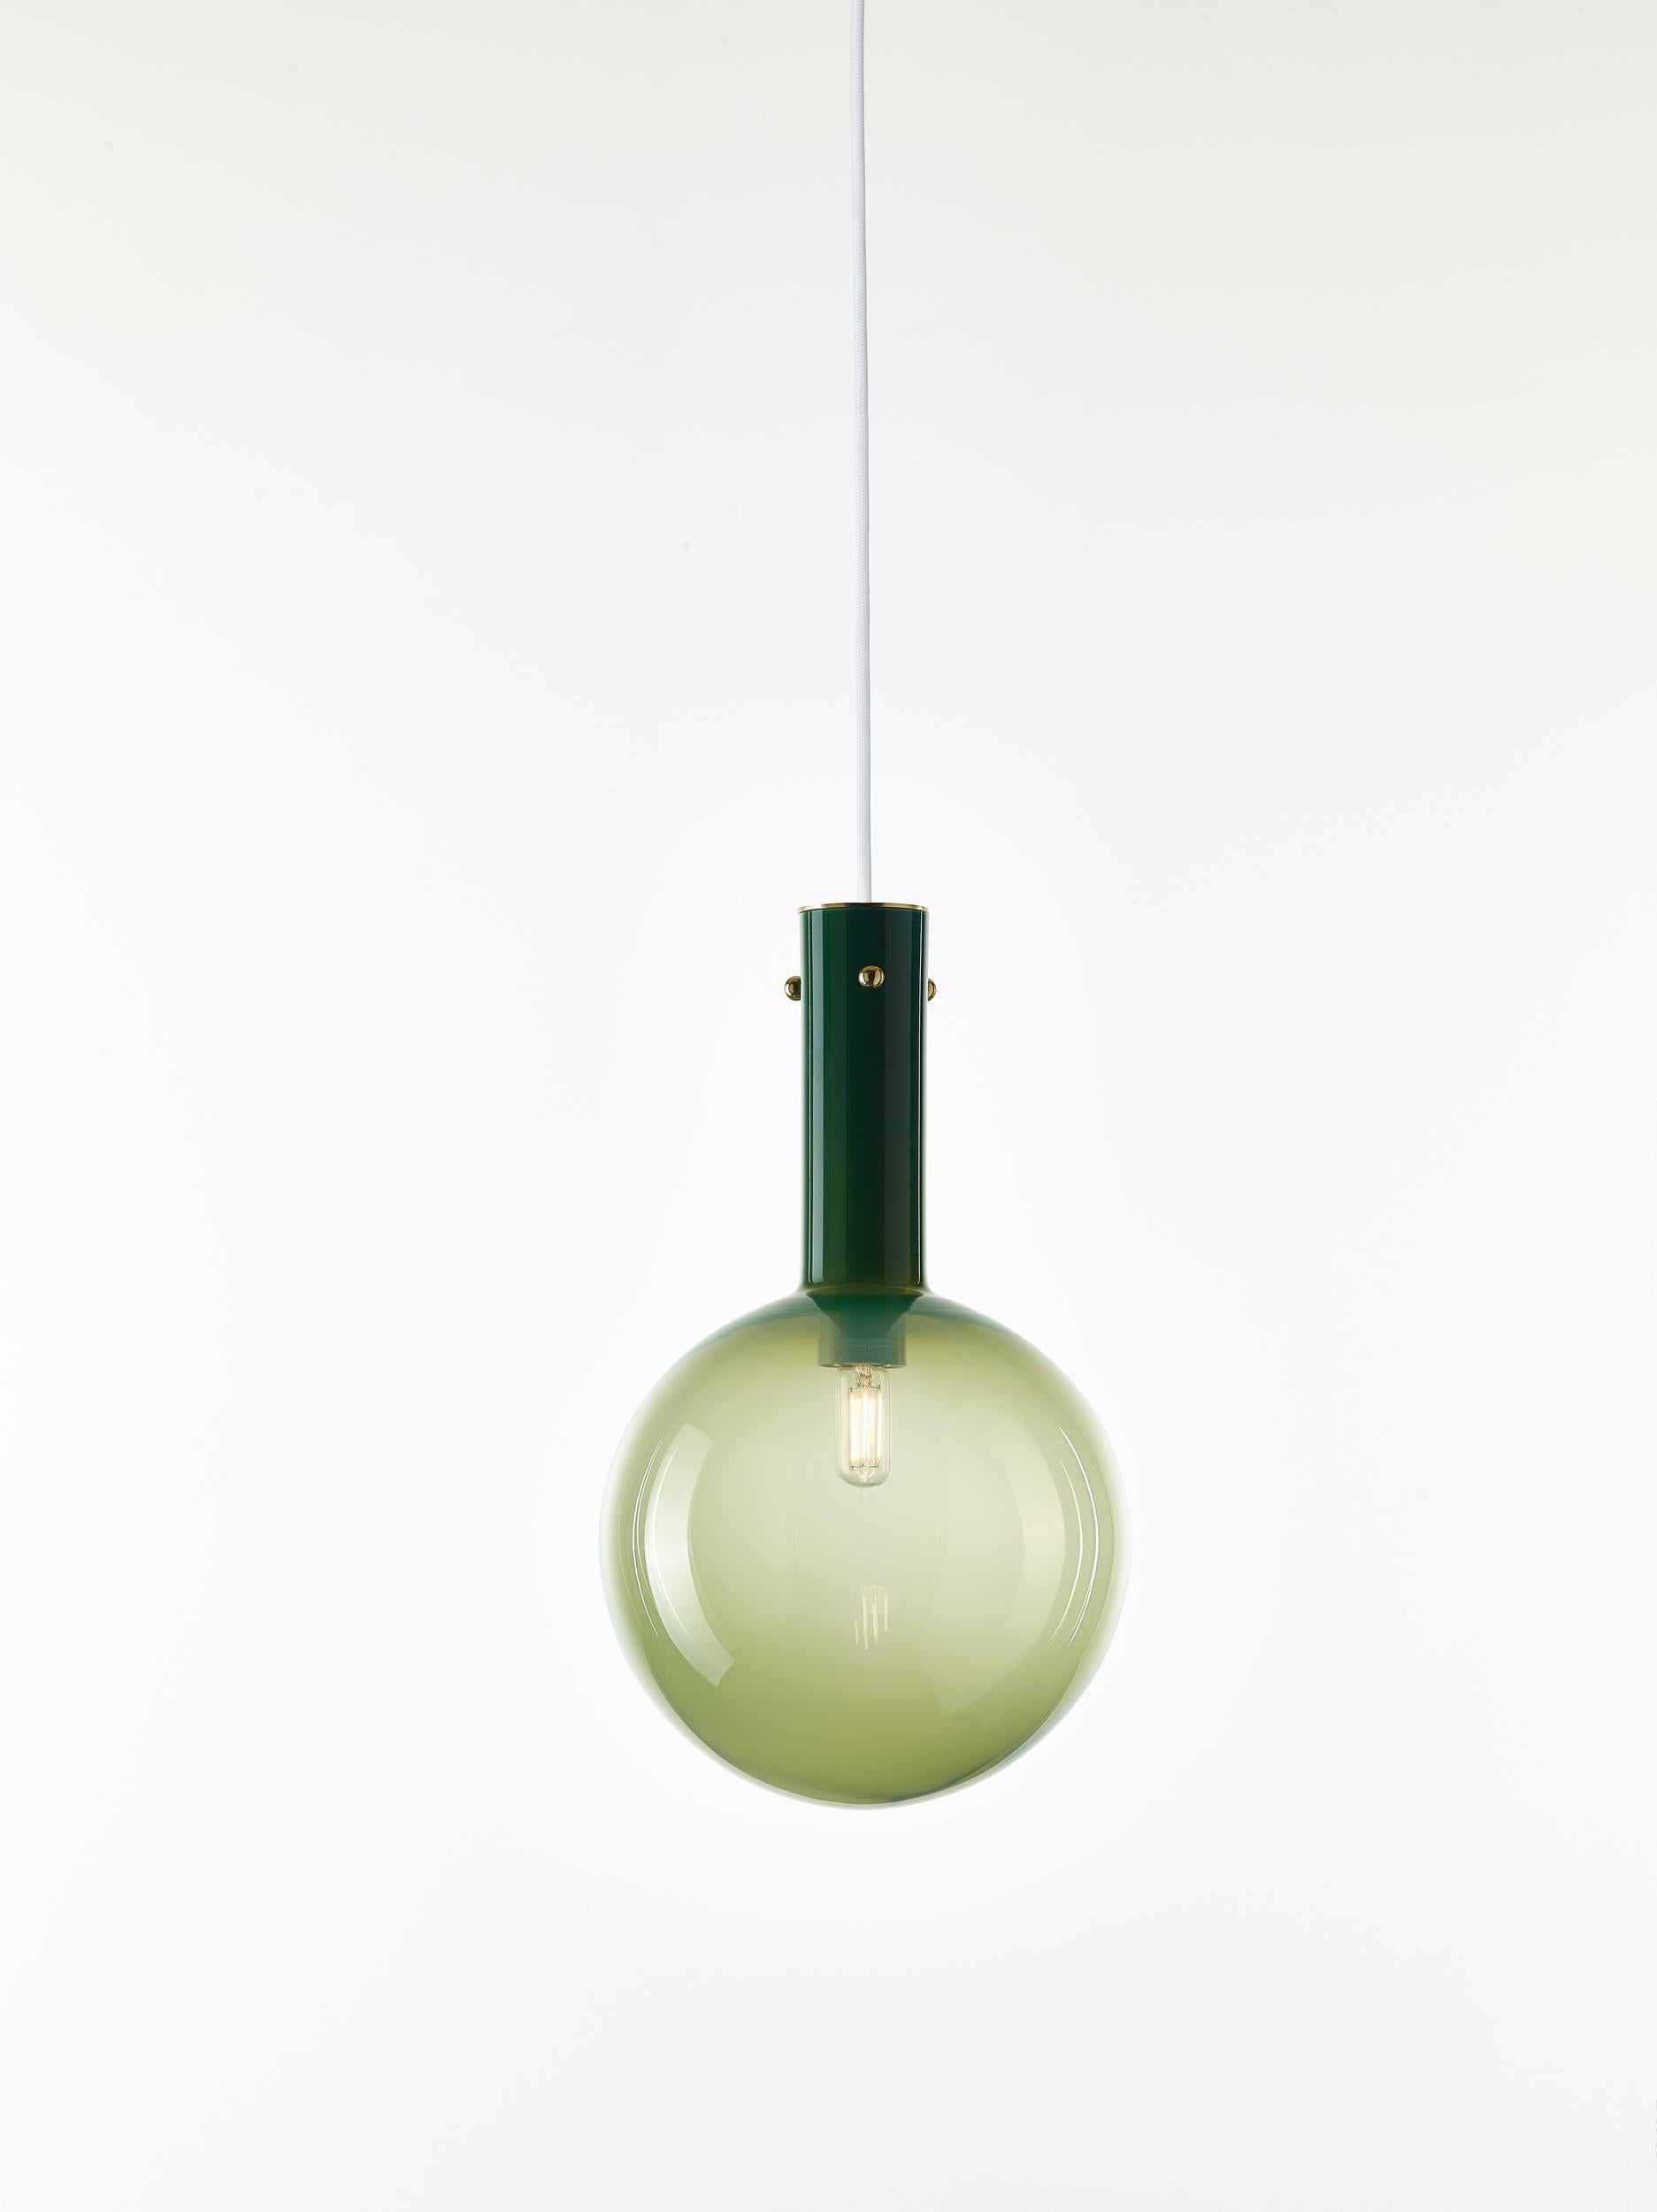 Green Sphaerae pendant light by Dechem Studio
Dimensions: D 20 x H 180 cm
Materials: Brass, metal, glass.
Also available: Different finishes and colours available

Only one homogenous piece of hand-blown glass creates the main body of Sphaerae